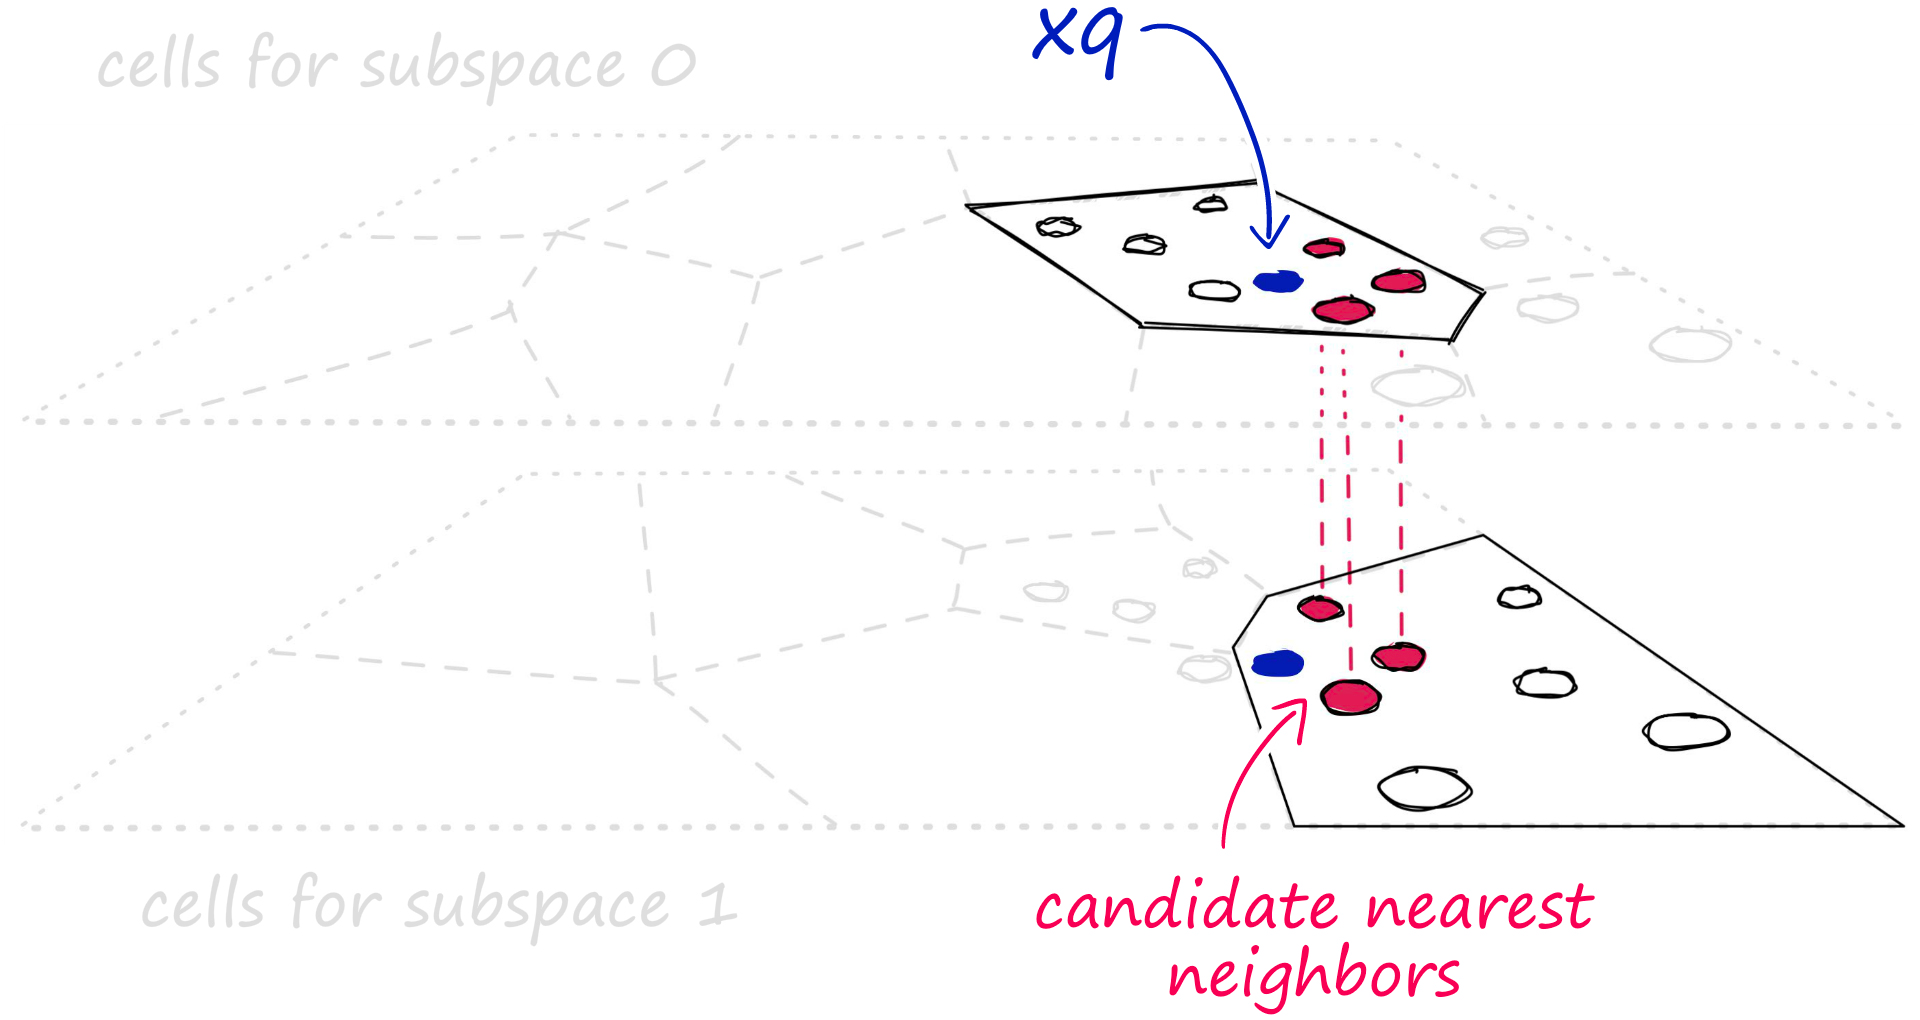 Voronoi cells split across multiple vector subspaces. Given a query vector xq, we would compare each xq subvector to its respective subspace cells.